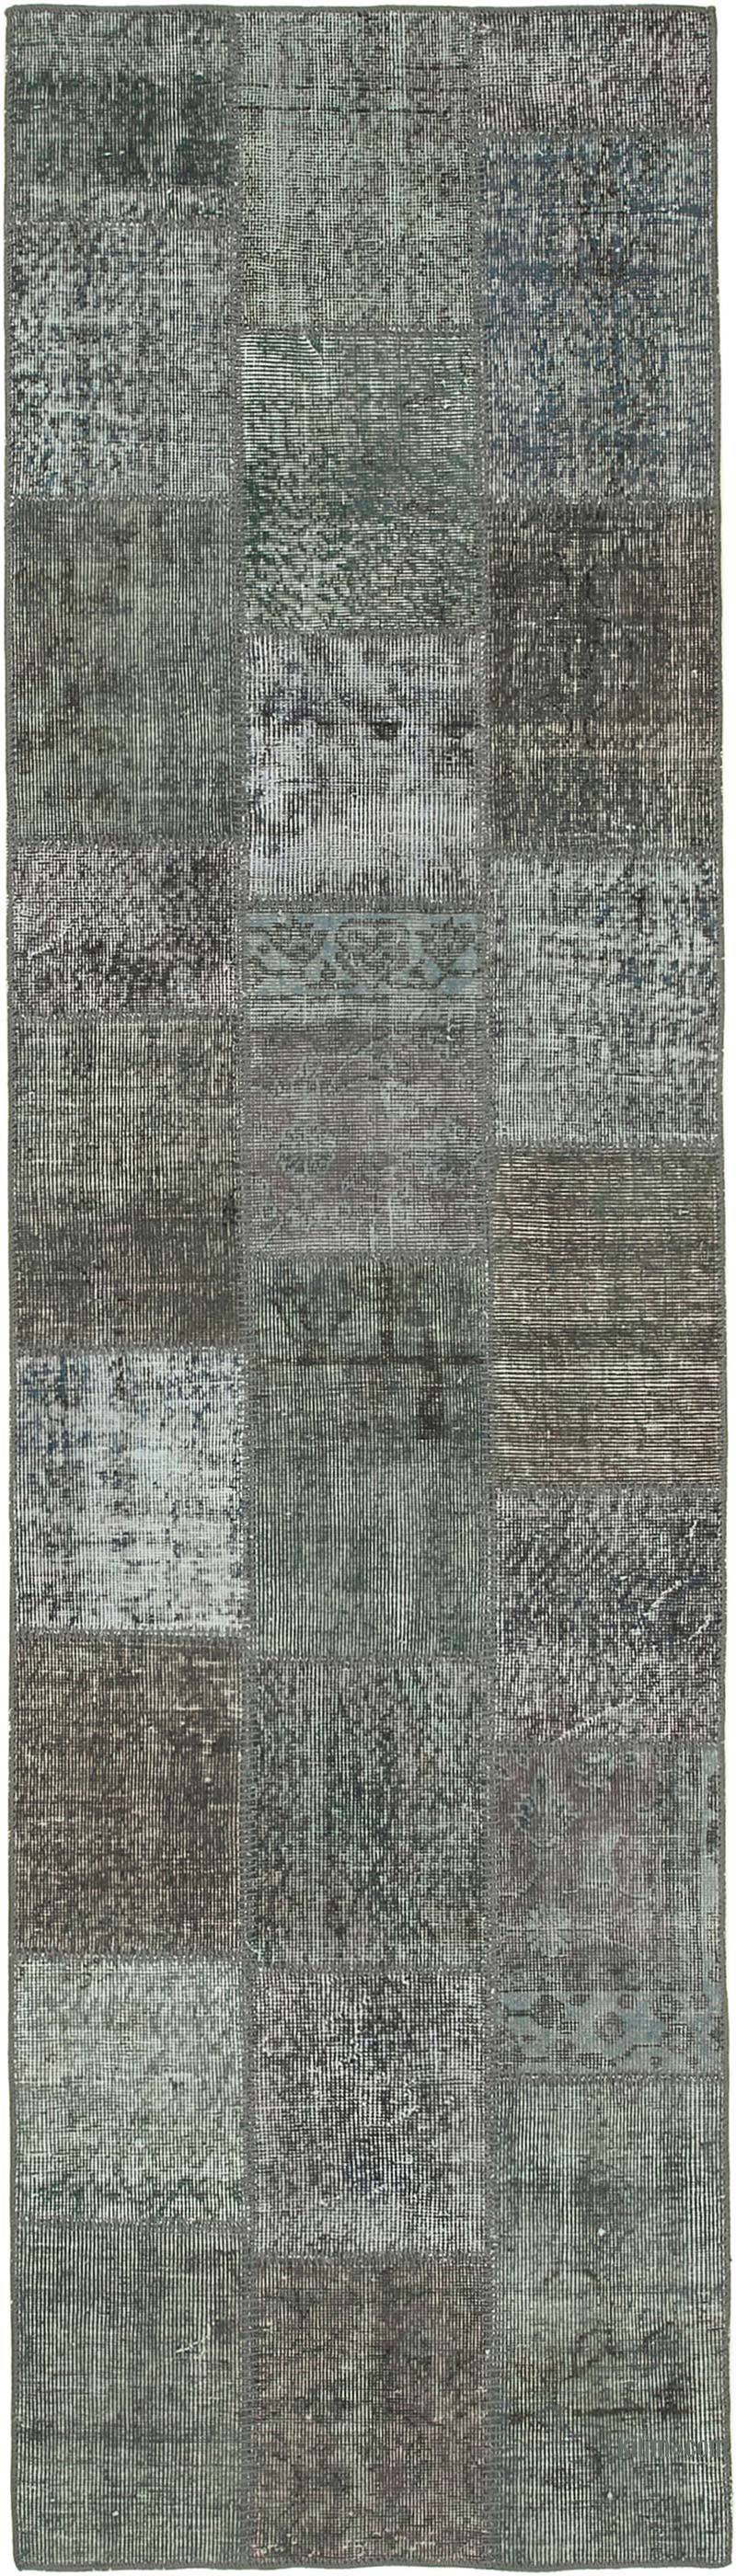 Grey Patchwork Hand-Knotted Turkish Runner - 2' 9" x 10'  (33 in. x 120 in.) - K0053869